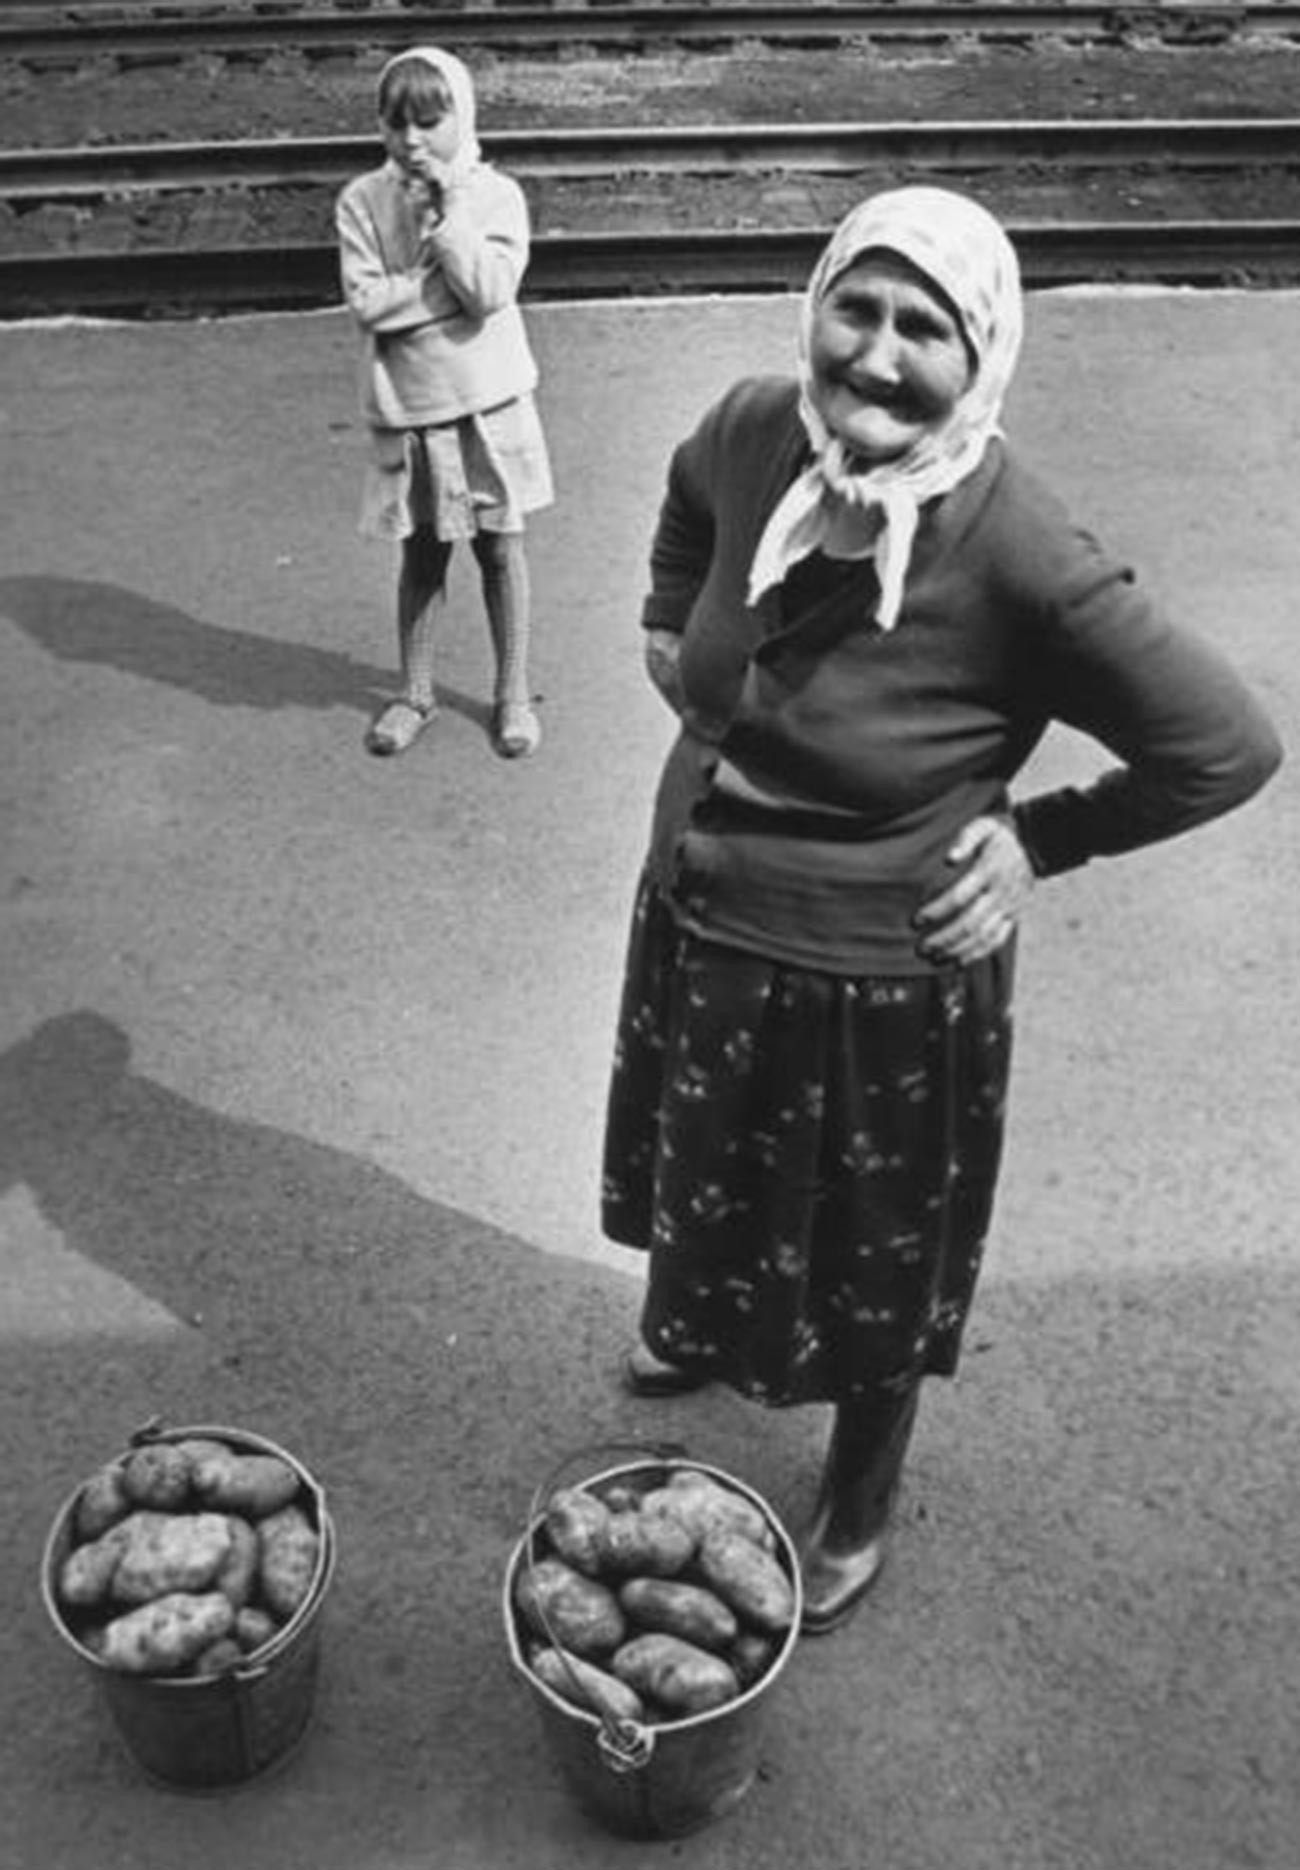  An old woman selling potatoes at a railway station somewhere in the Urals, 1974